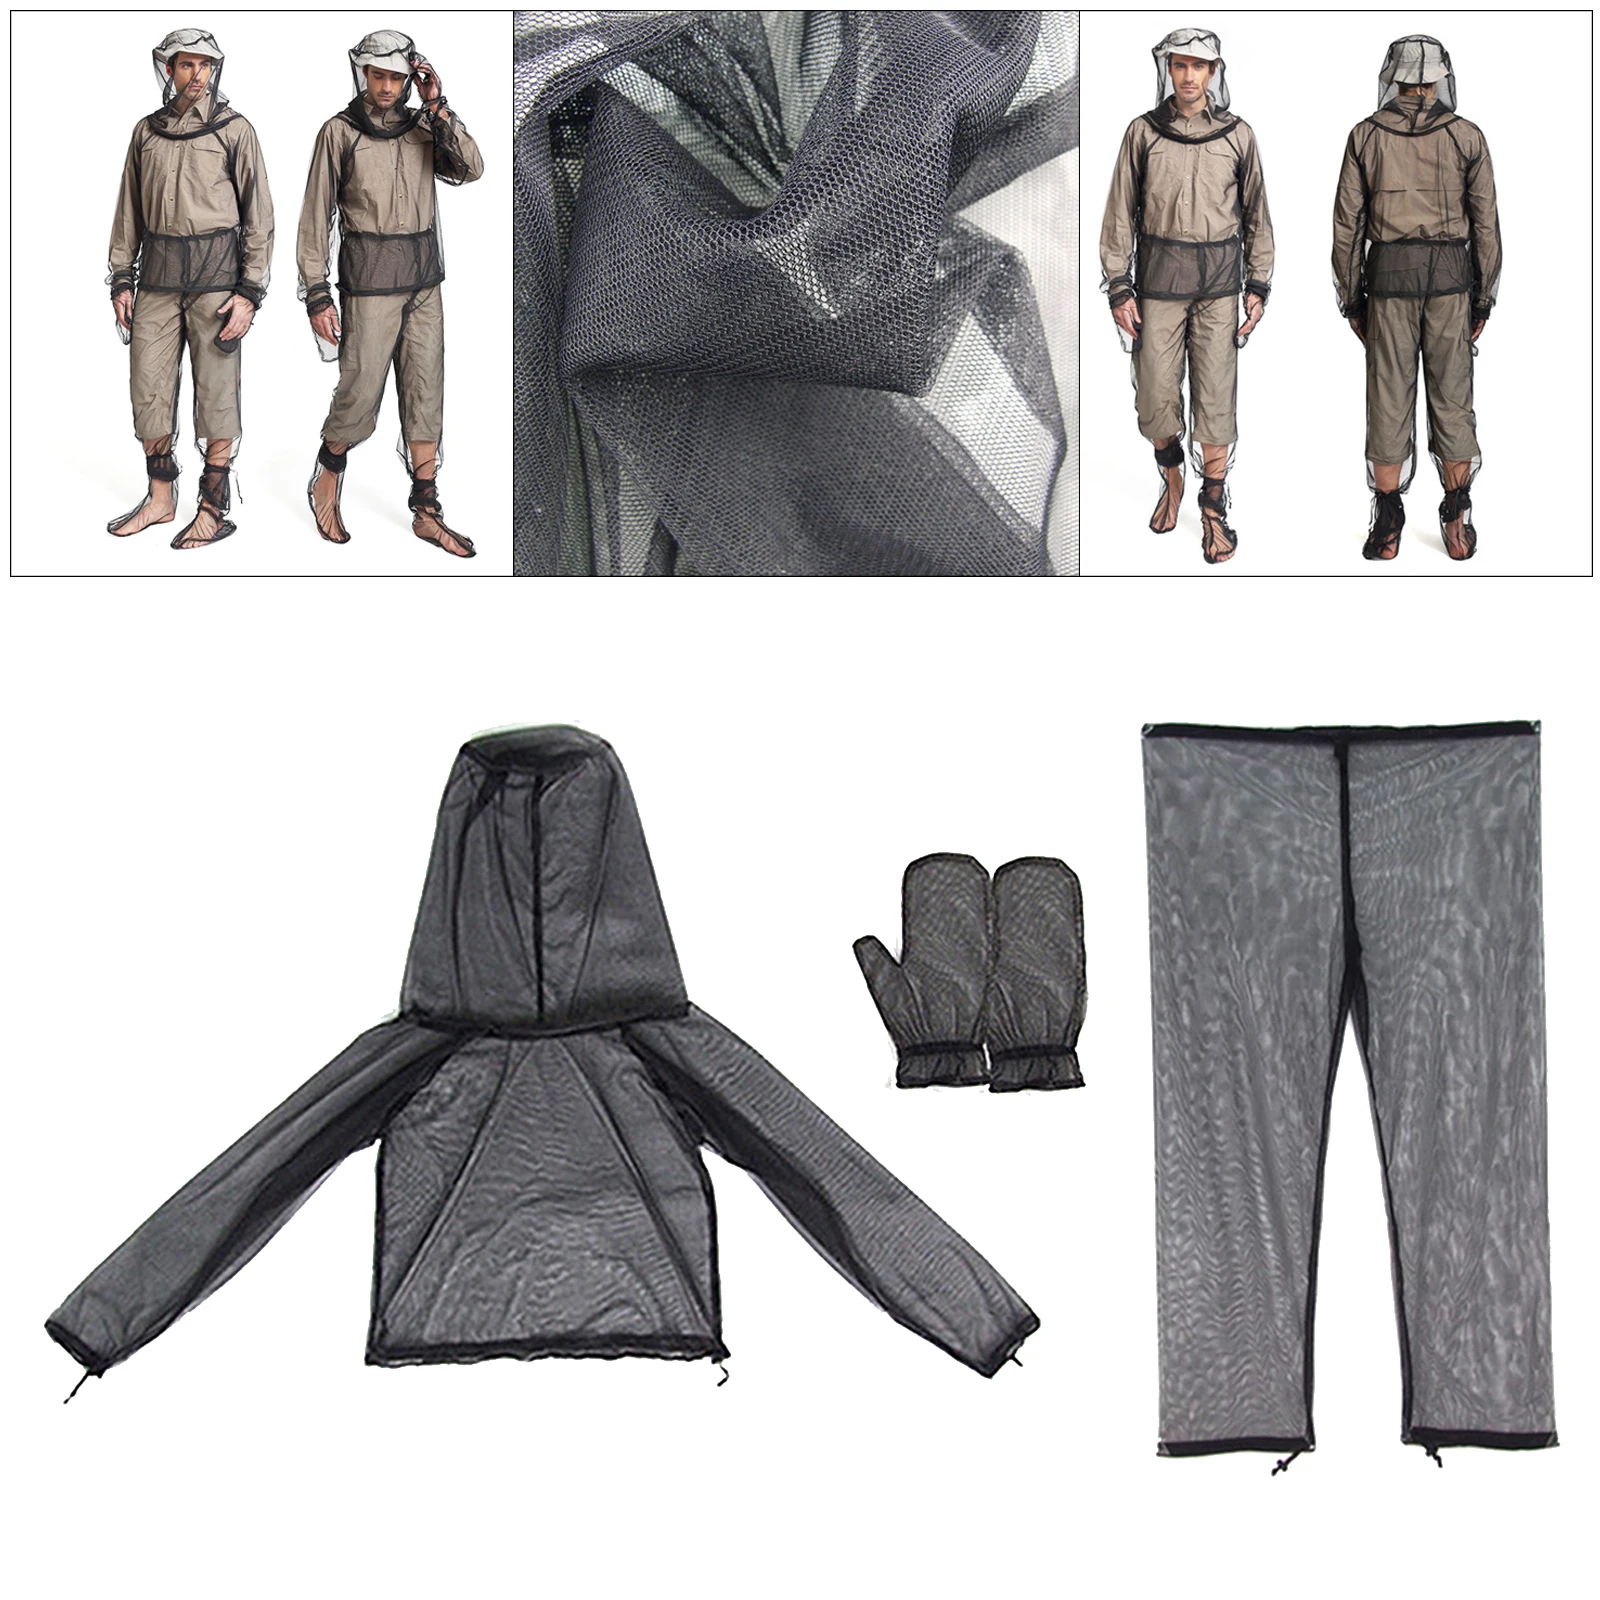 Anti-Mosquito Suit Bee Mesh Jacket Coat Pant Gloves Outdoor Protection